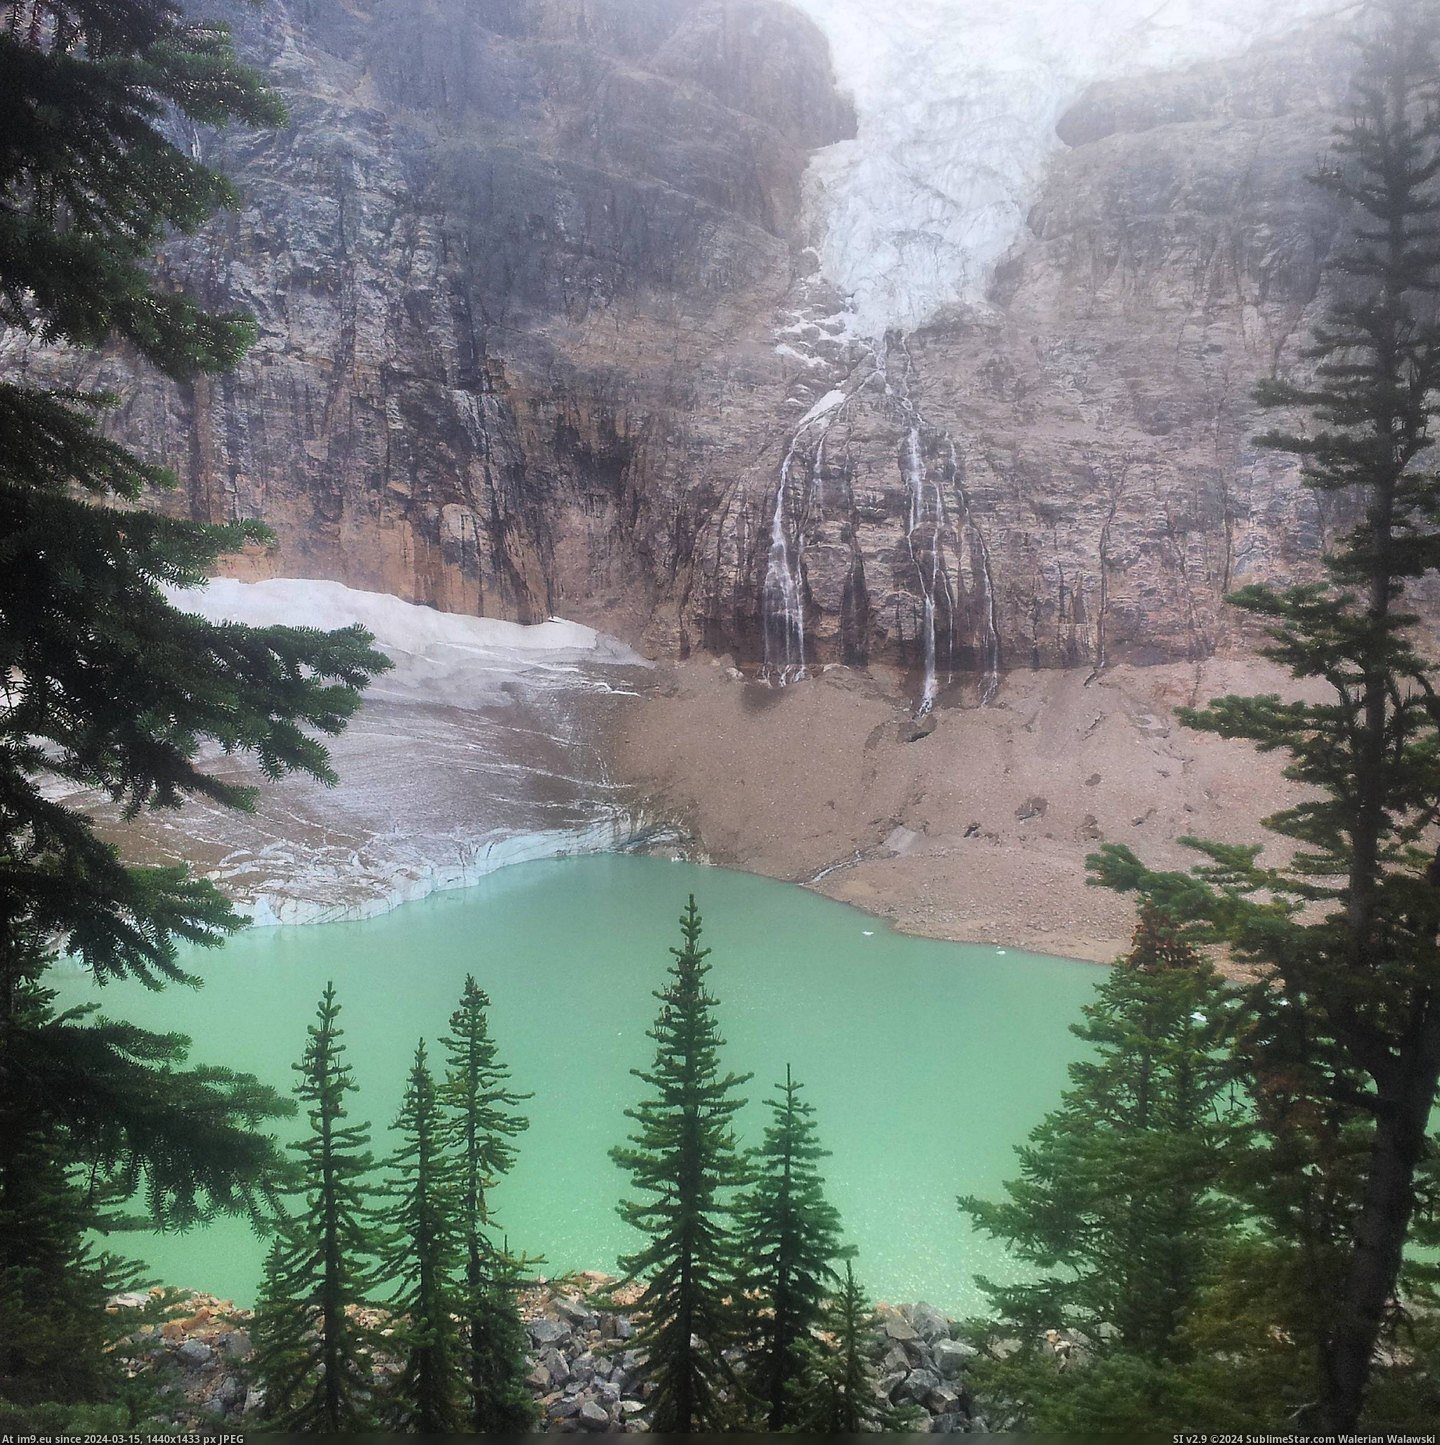 #Park #National #Angel #Quality #Highly #Crappy #Recommend #Seein #Glacier #Excuse #Jasper #2448x2448 [Earthporn] [2448x2448] Excuse the crappy quality. This is Angel Glacier in Jasper National Park, I would highly recommend seein Pic. (Obraz z album My r/EARTHPORN favs))